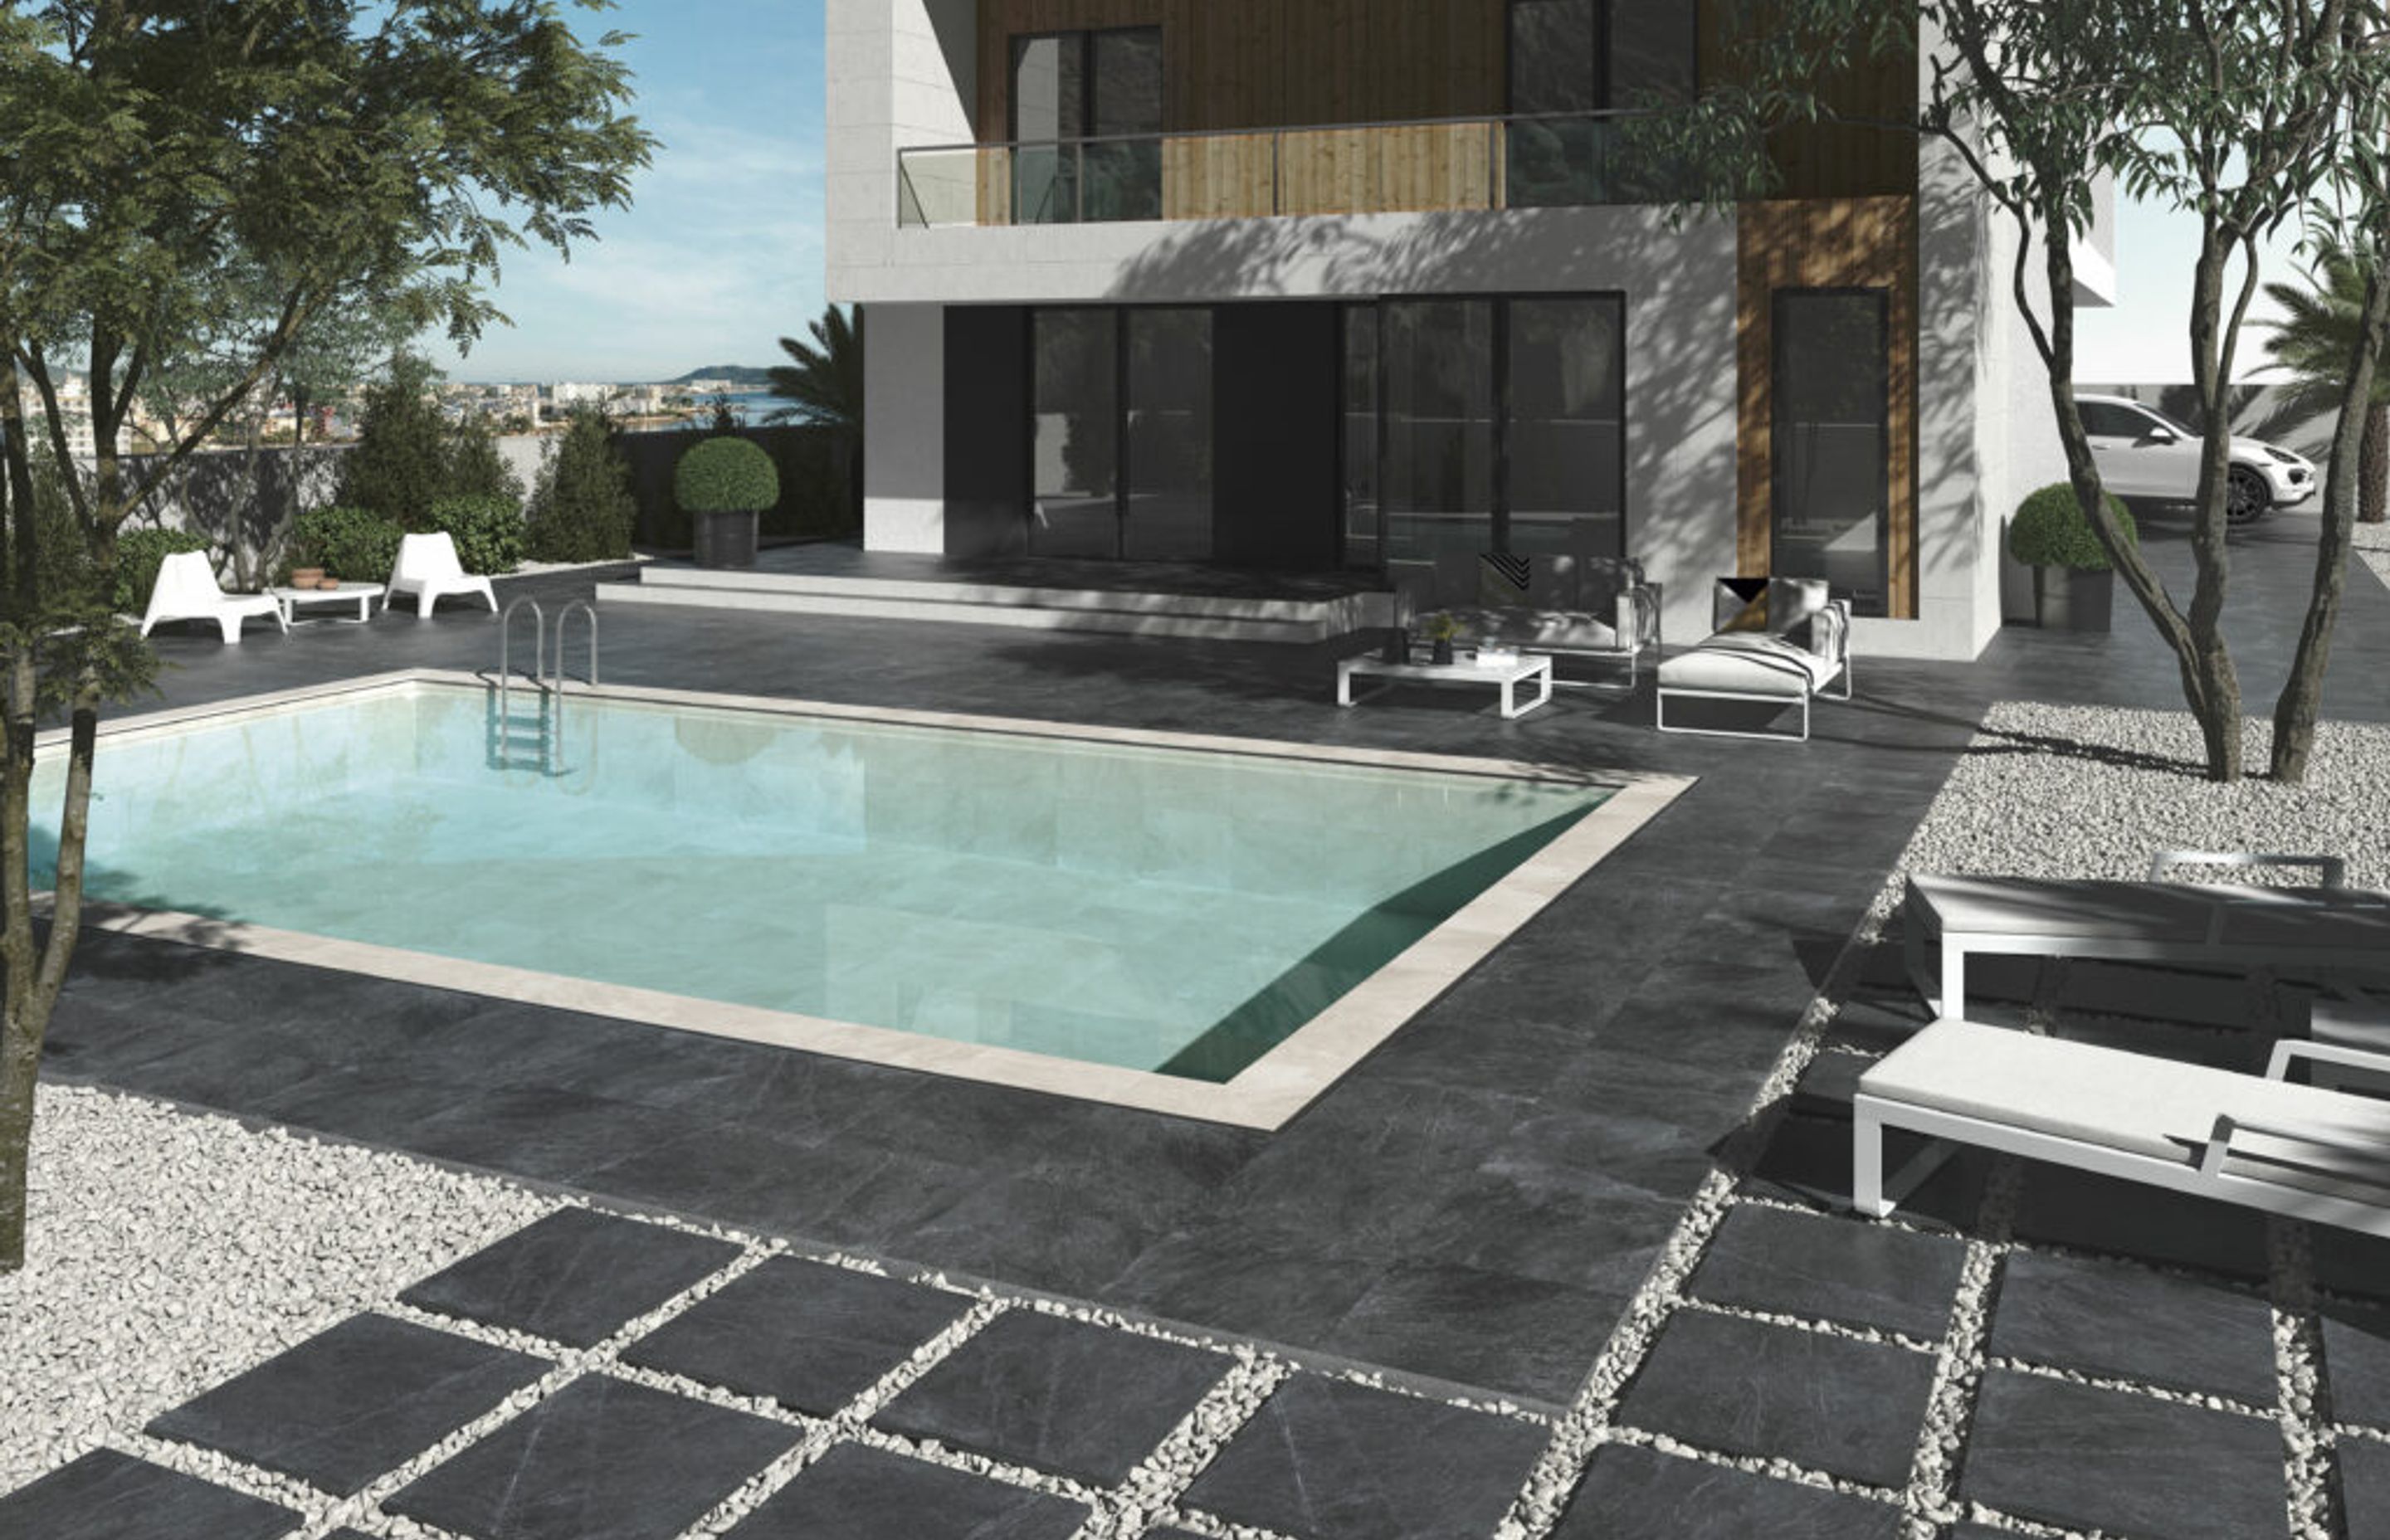 Thanks to the new Smooth &amp; Grip range of tiles from Spanish producer, Vitacer, it is now possible to specify the same tile for use both indoors and outdoors.